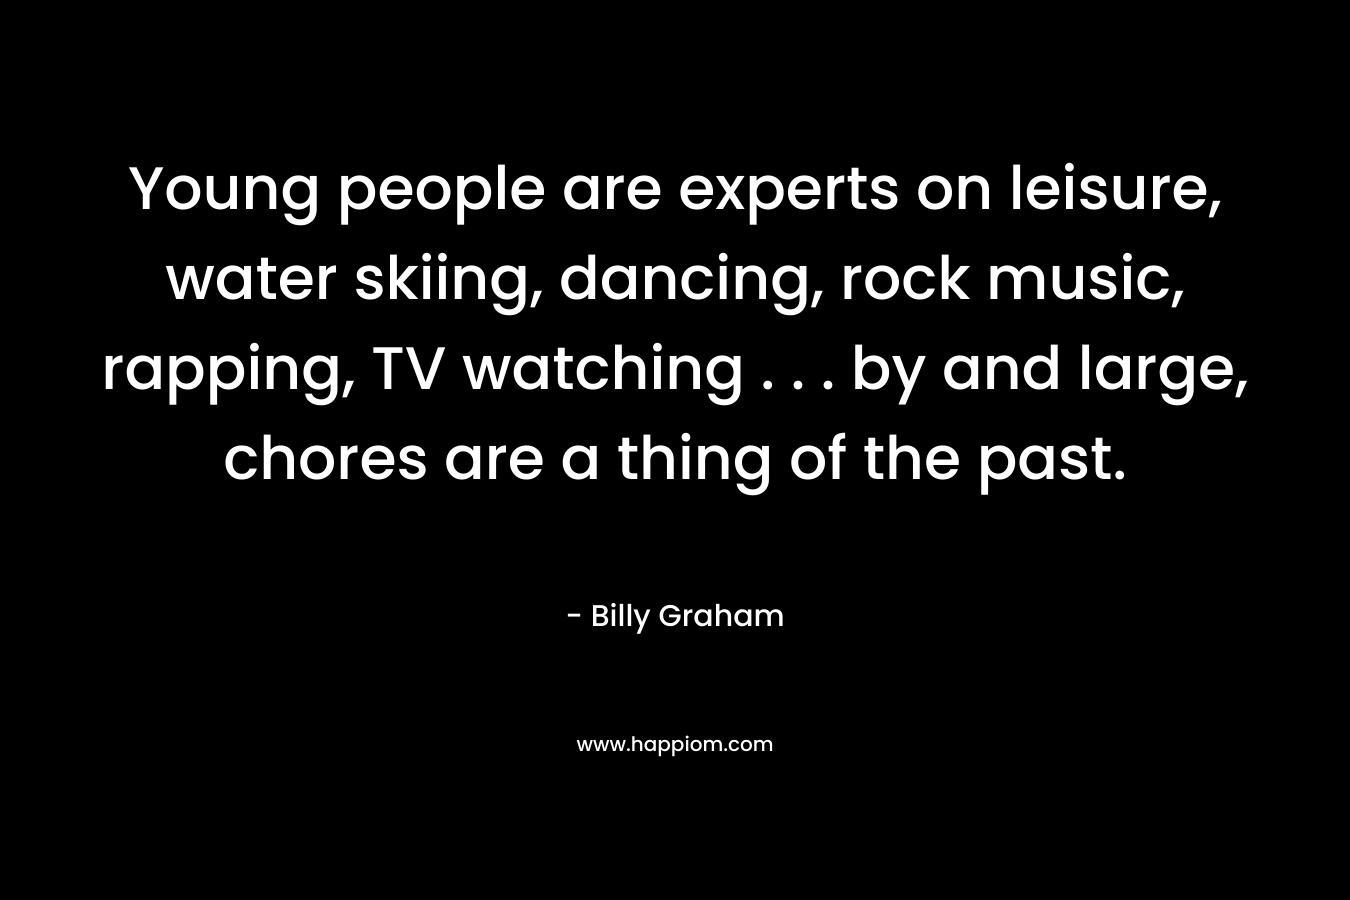 Young people are experts on leisure, water skiing, dancing, rock music, rapping, TV watching . . . by and large, chores are a thing of the past. – Billy Graham